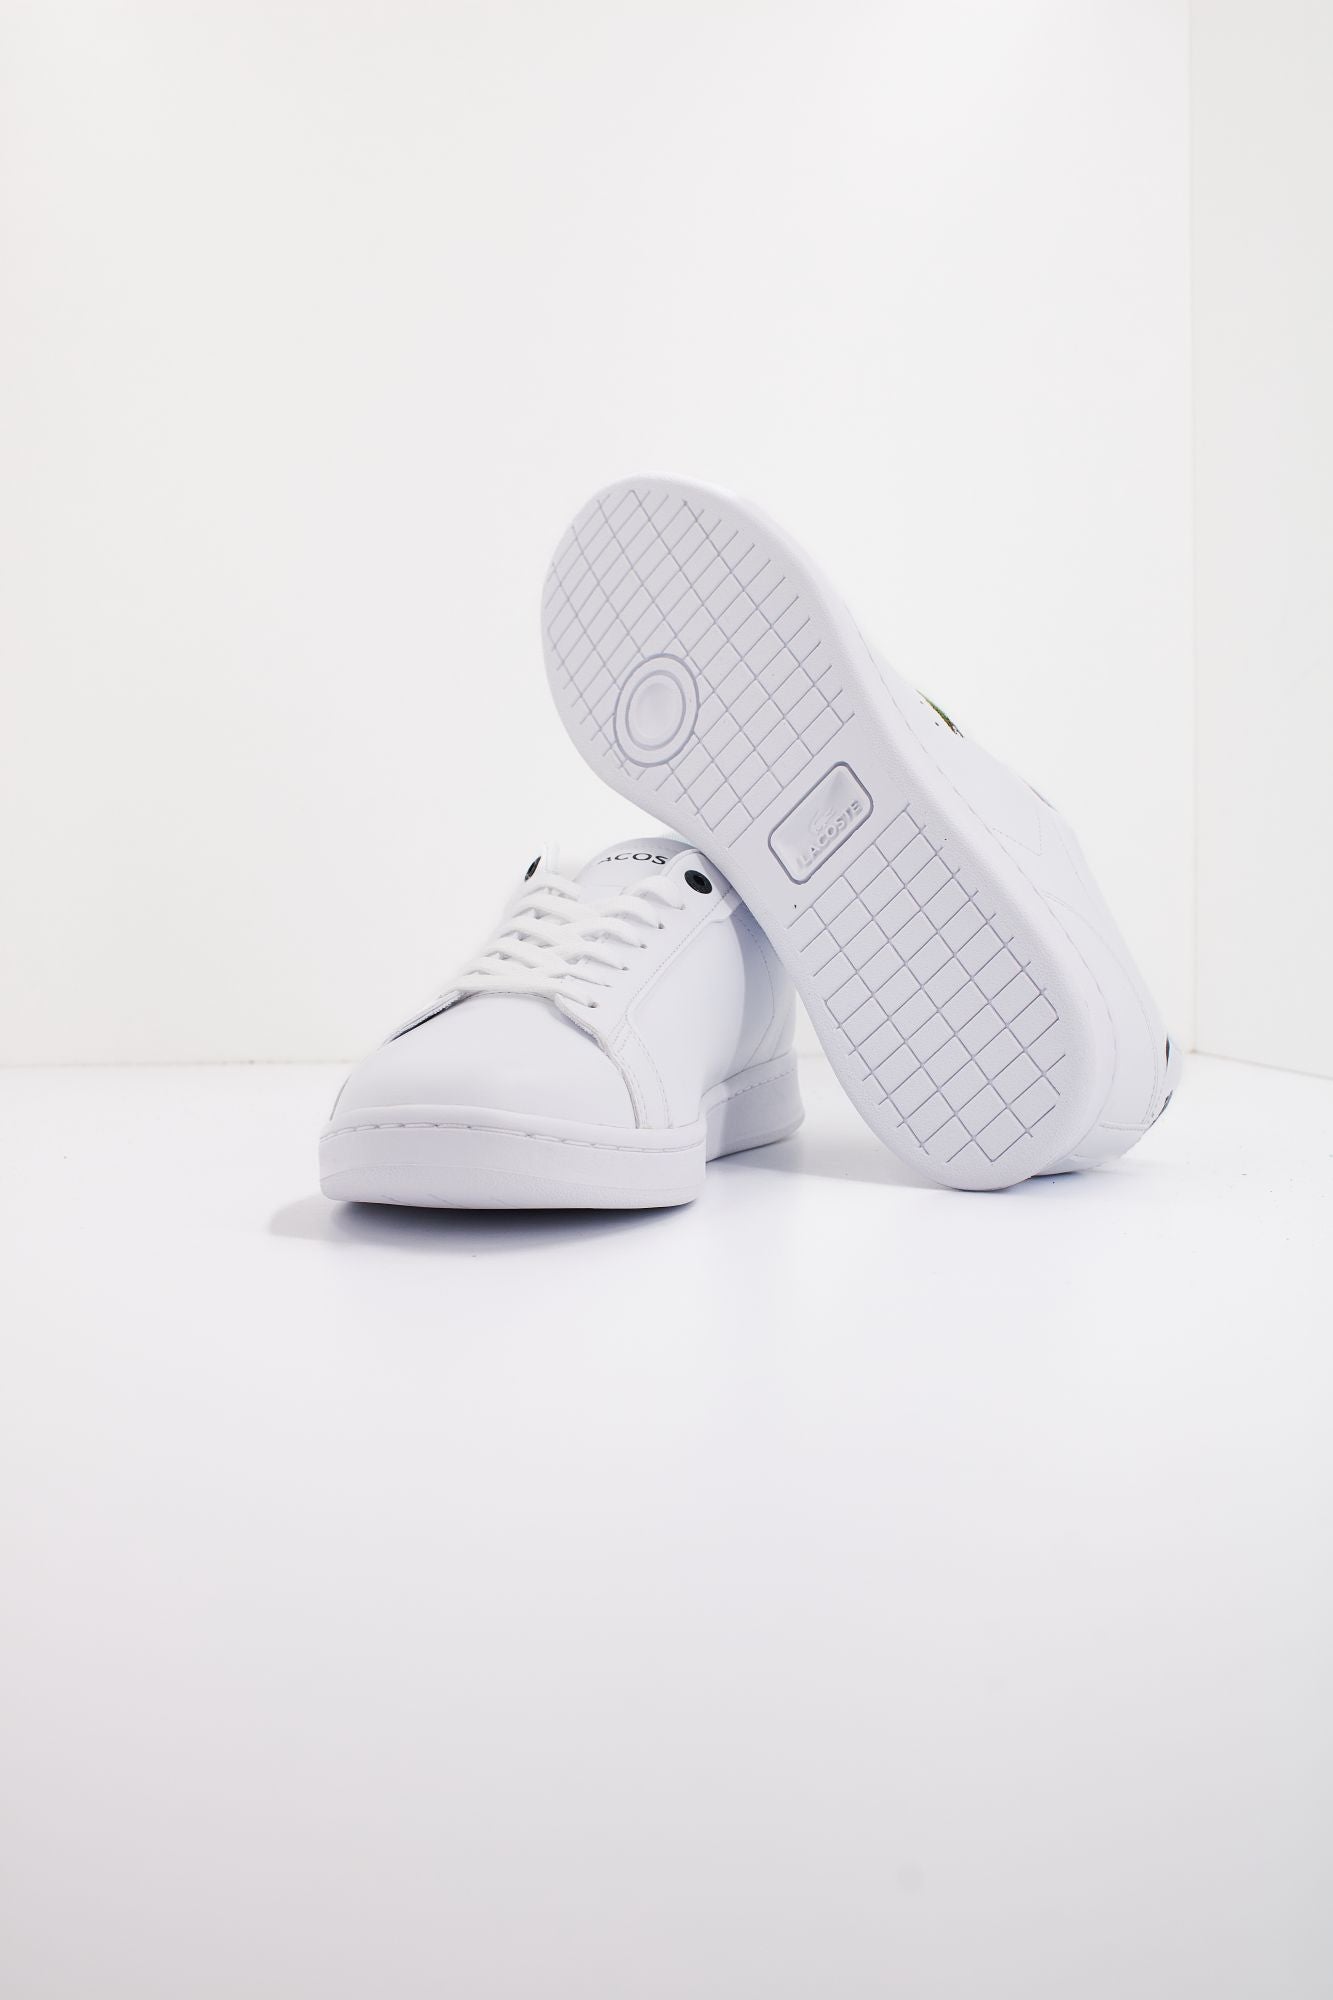 LACOSTE CARNABY PRO BL LEATHER TO en color BLANCO (4)